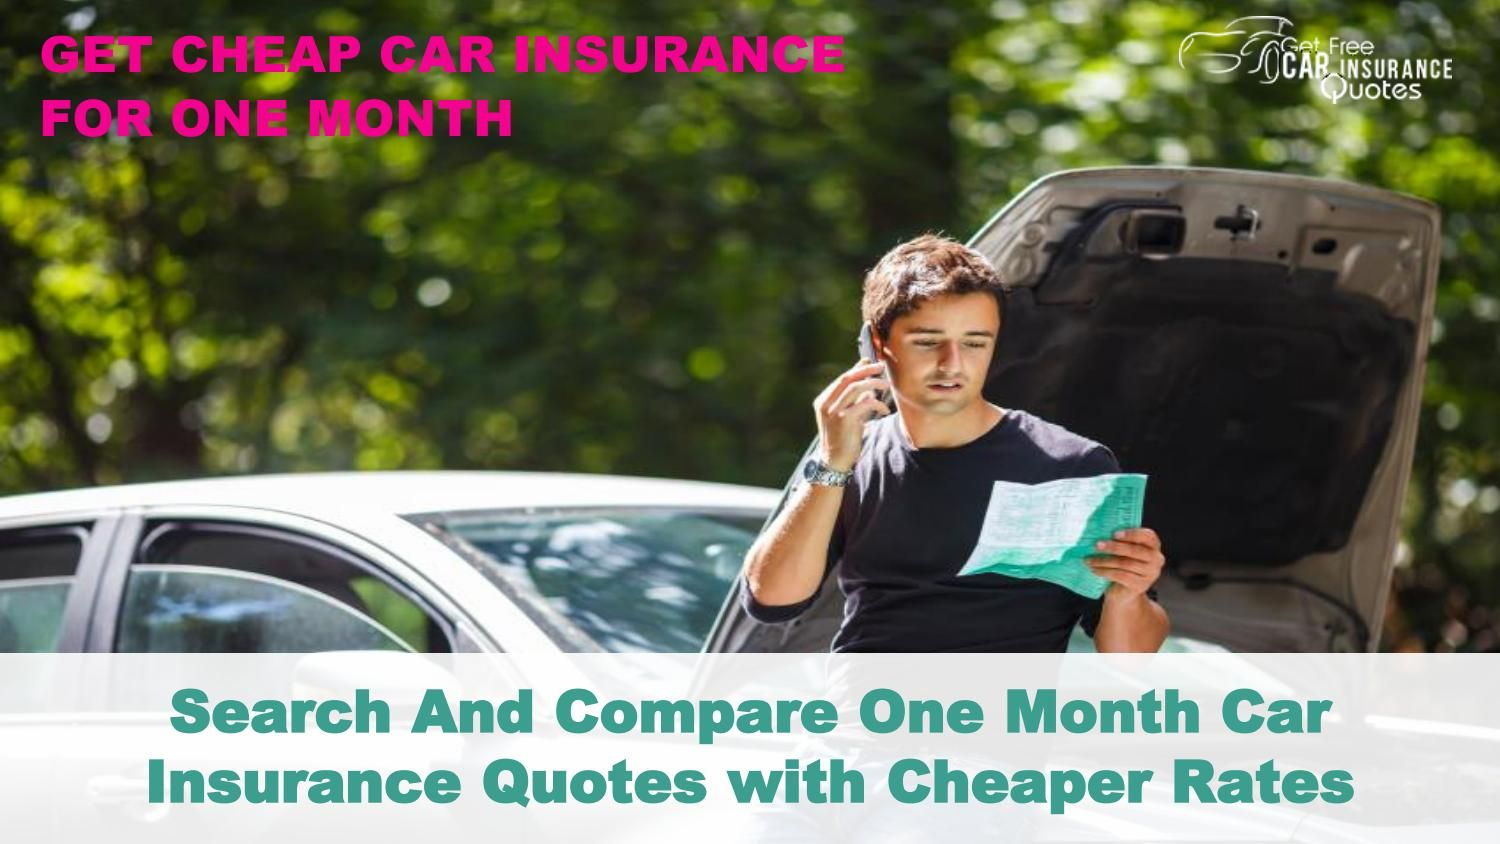 Can You Buy Car Insurance For One Month